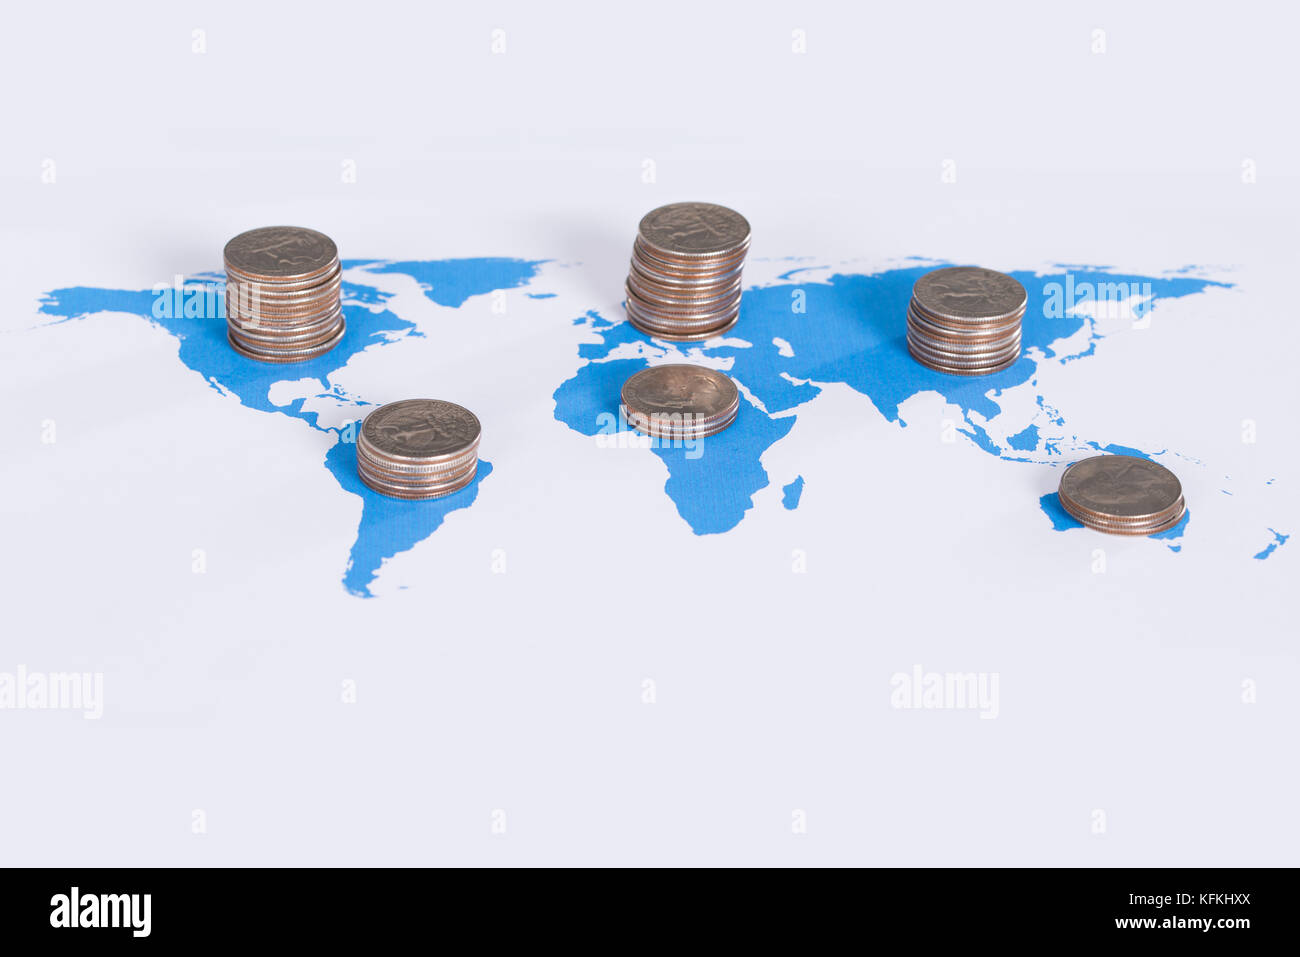 Global business concept. Coin stack on world map Stock Photo